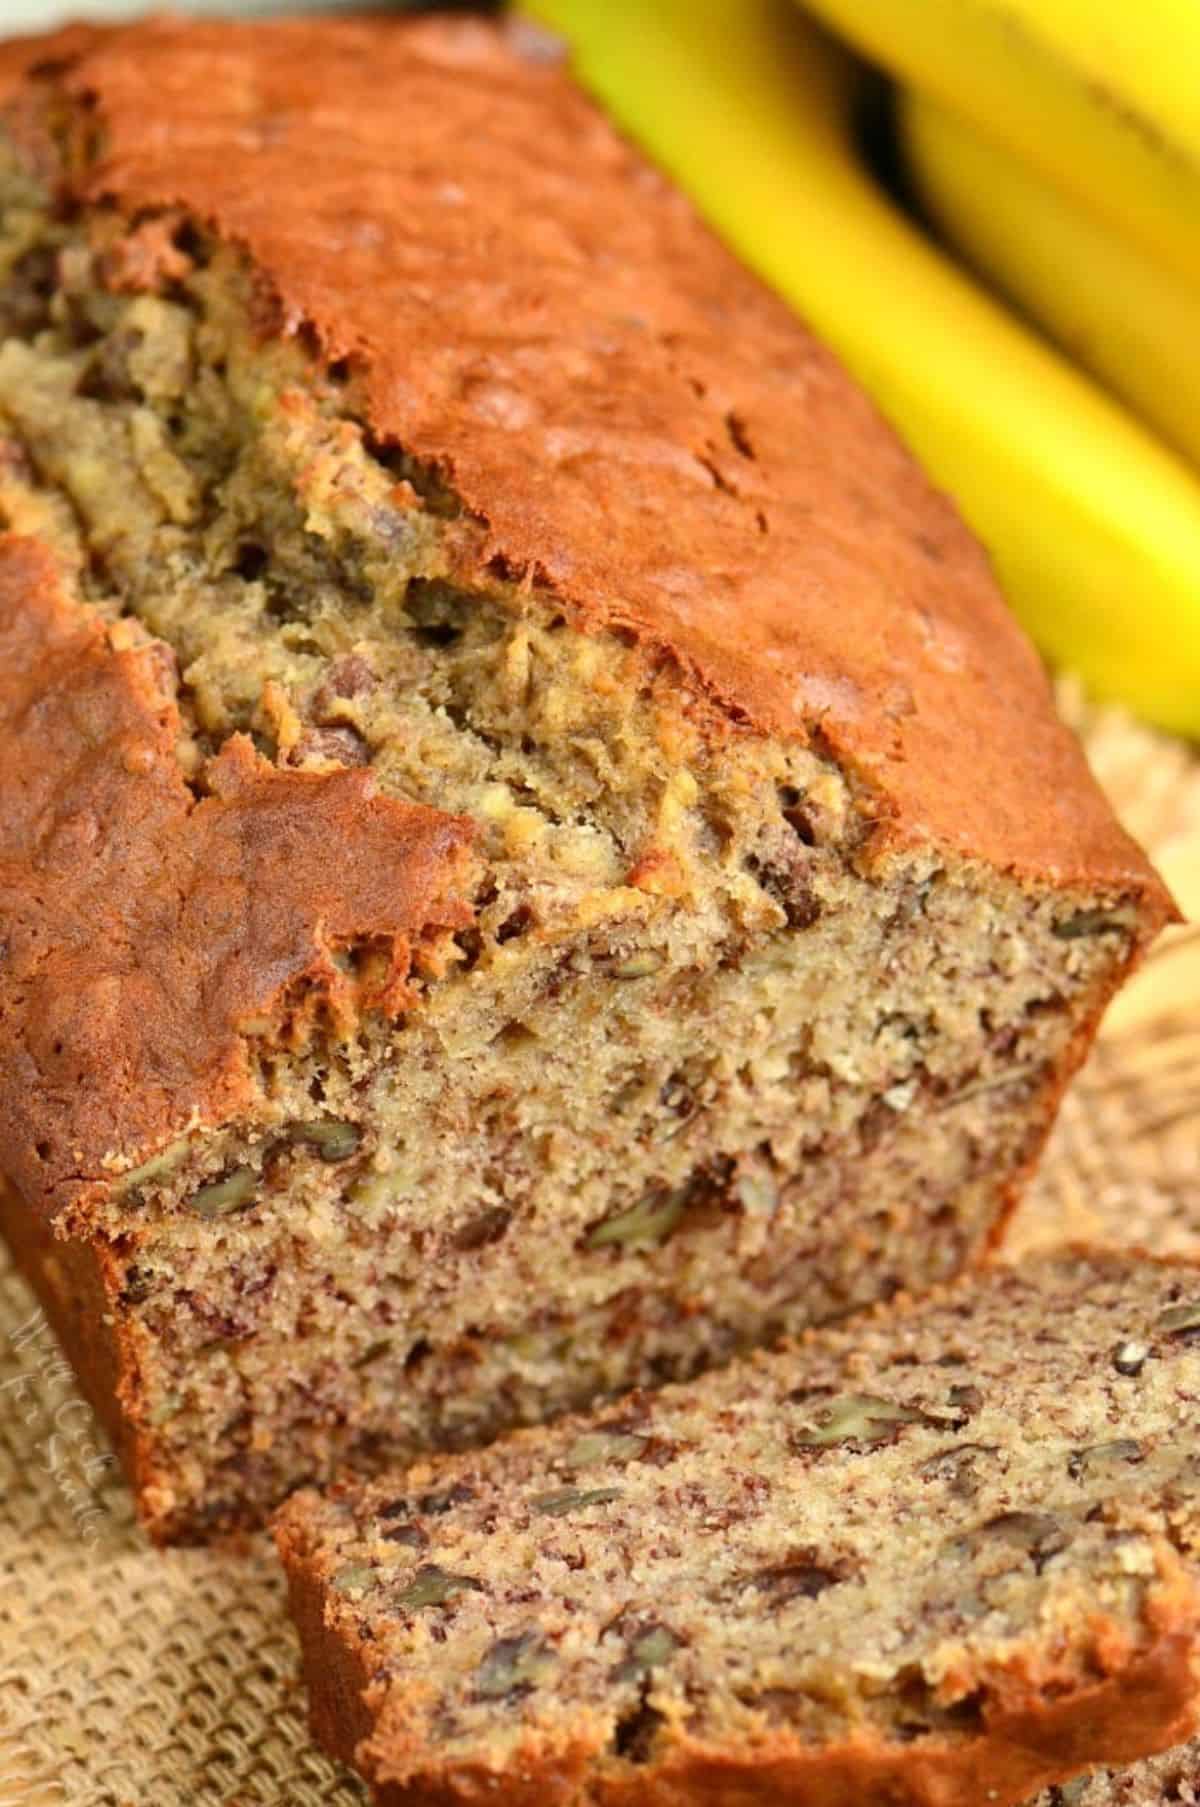 One slice of banana bread has been removed from the end of a loaf. 